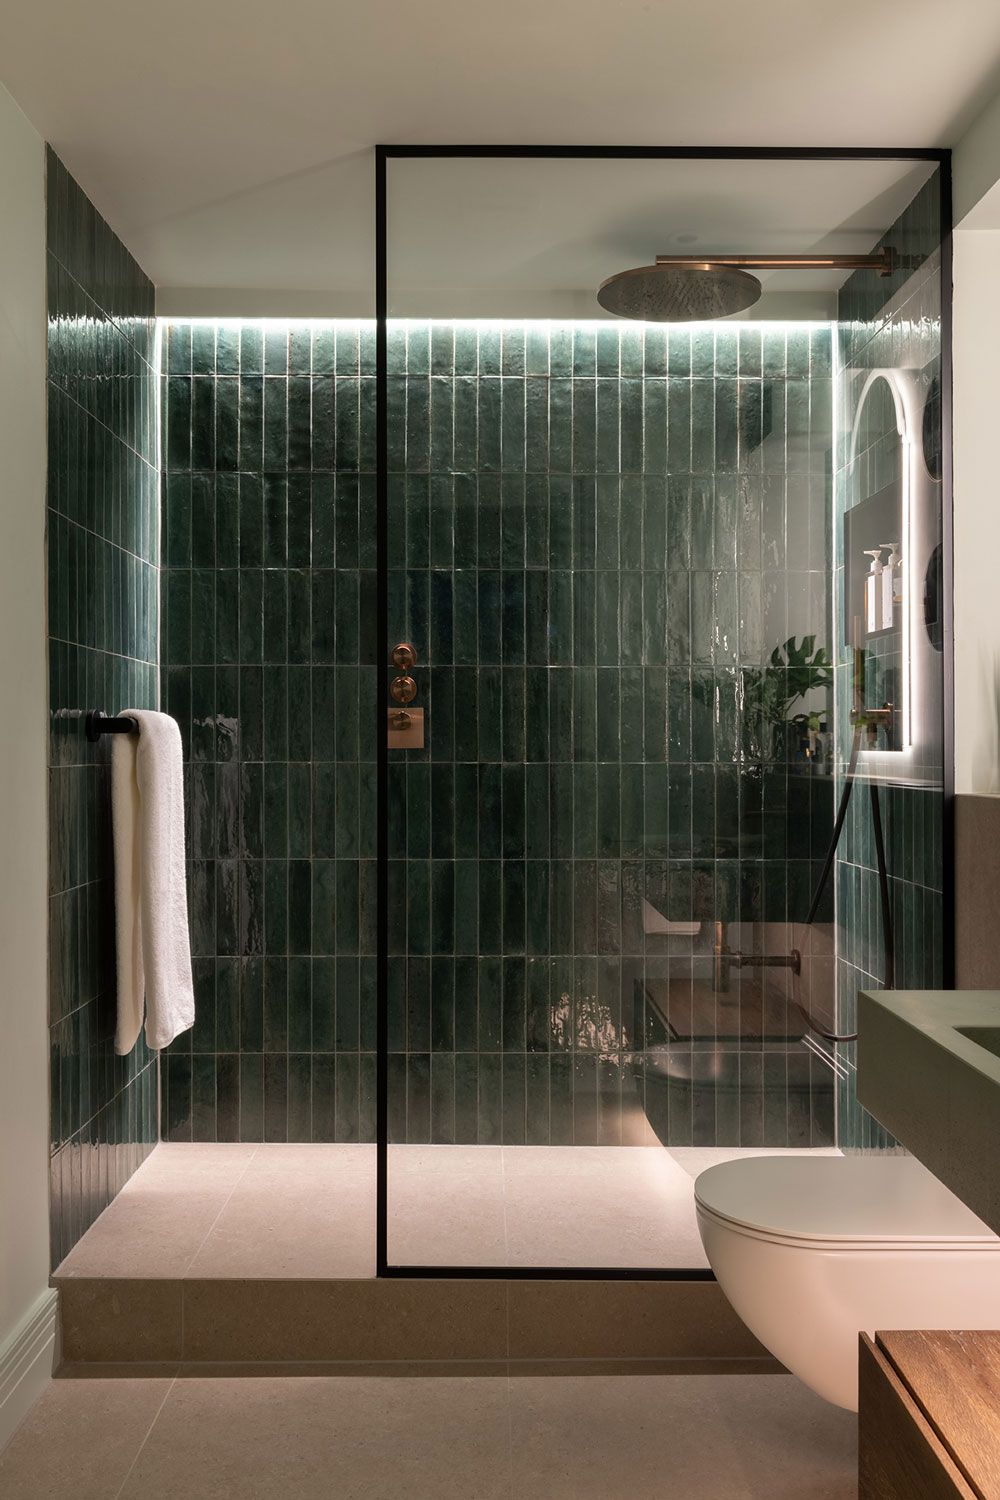 How Ensure Perfection With Bathroom Inspiration?